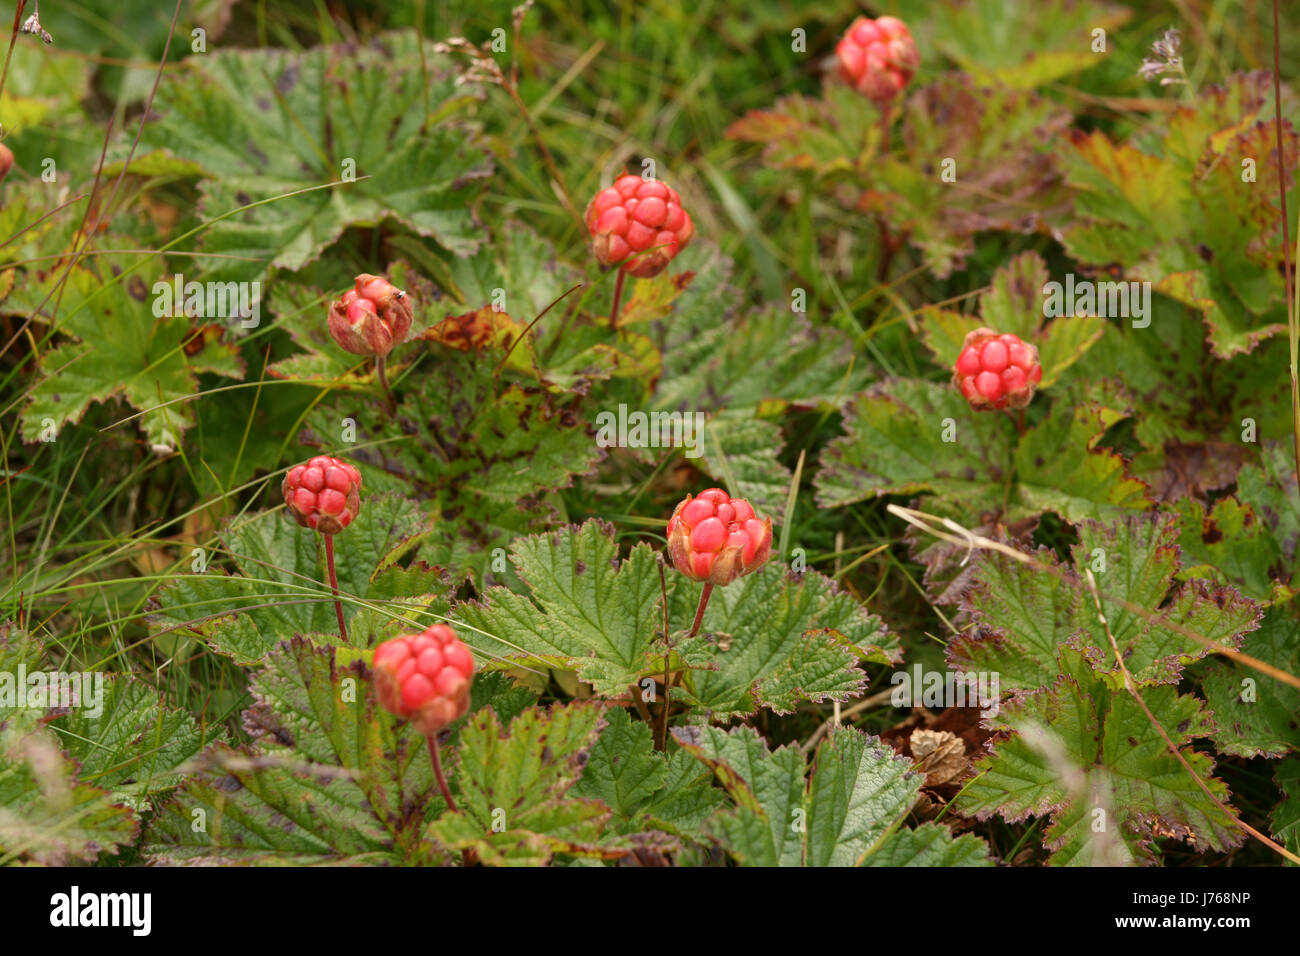 Moltebeeren High Resolution Stock Photography and Images - Alamy